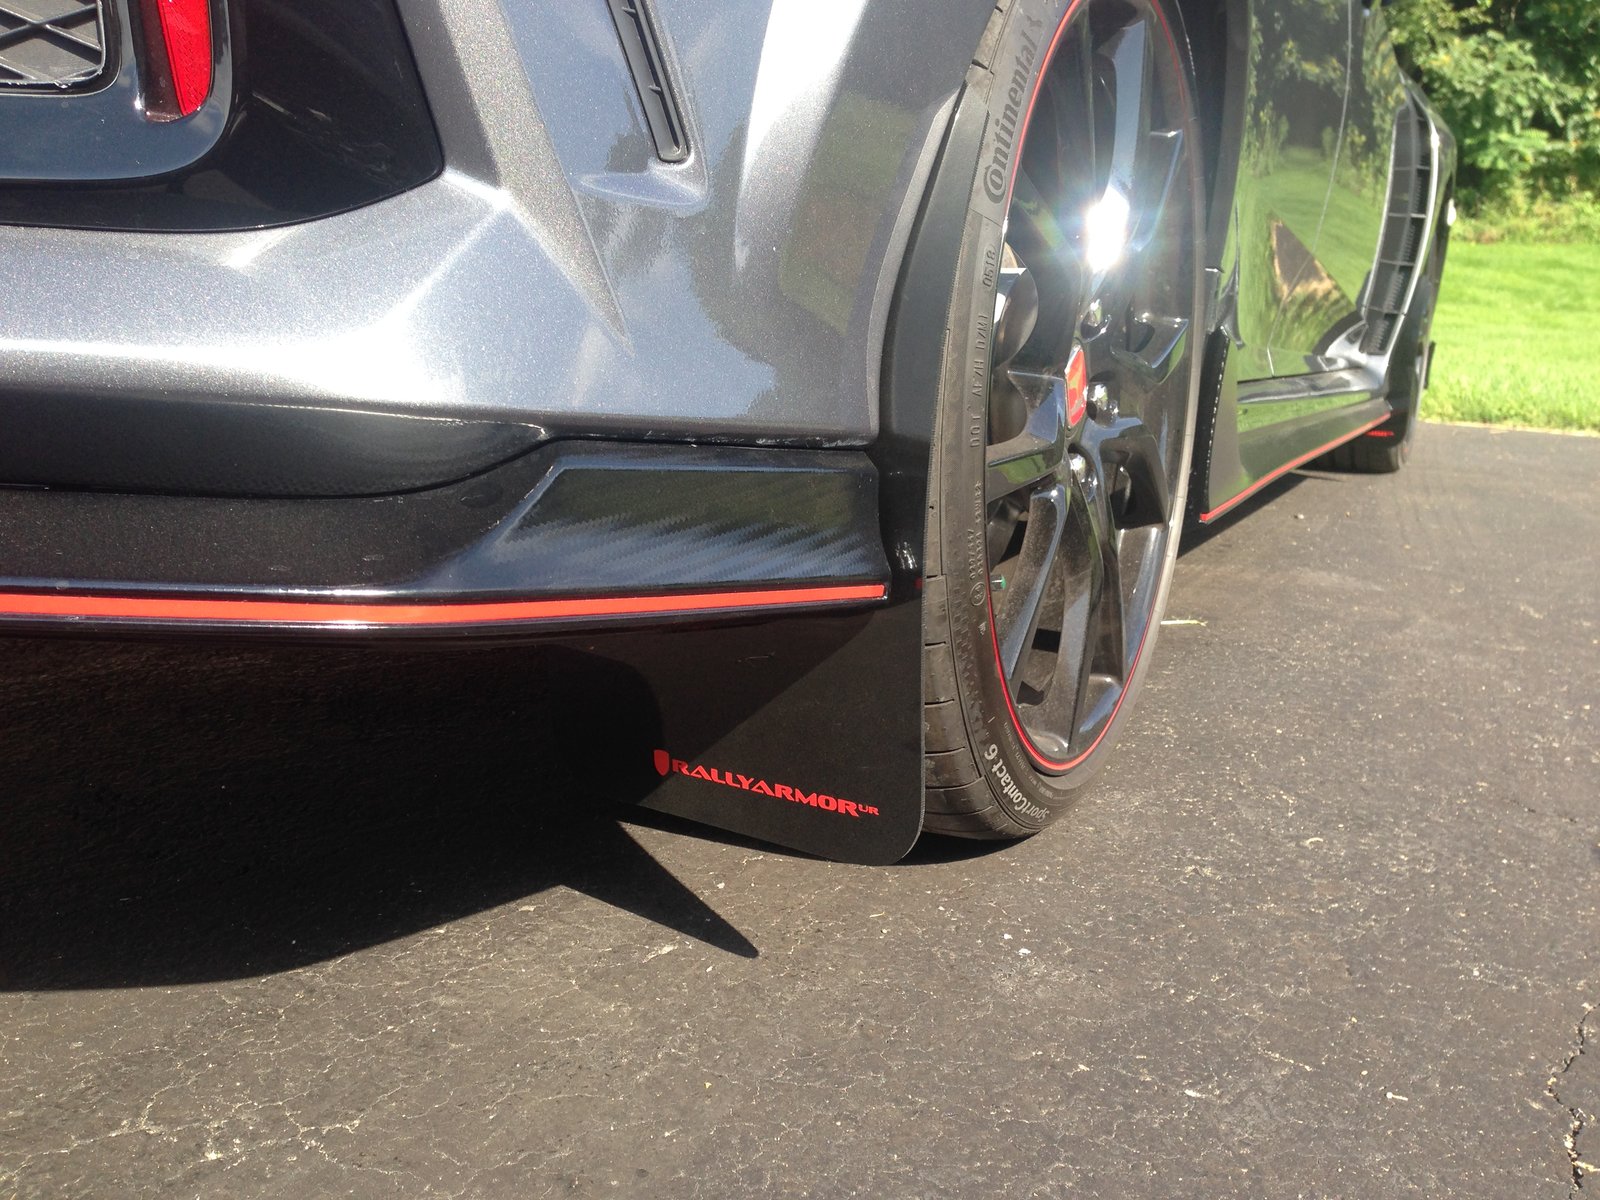 Honda Civic 10th gen Official RallyArmor Mudflaps for the Type R IMG-2768.JPG